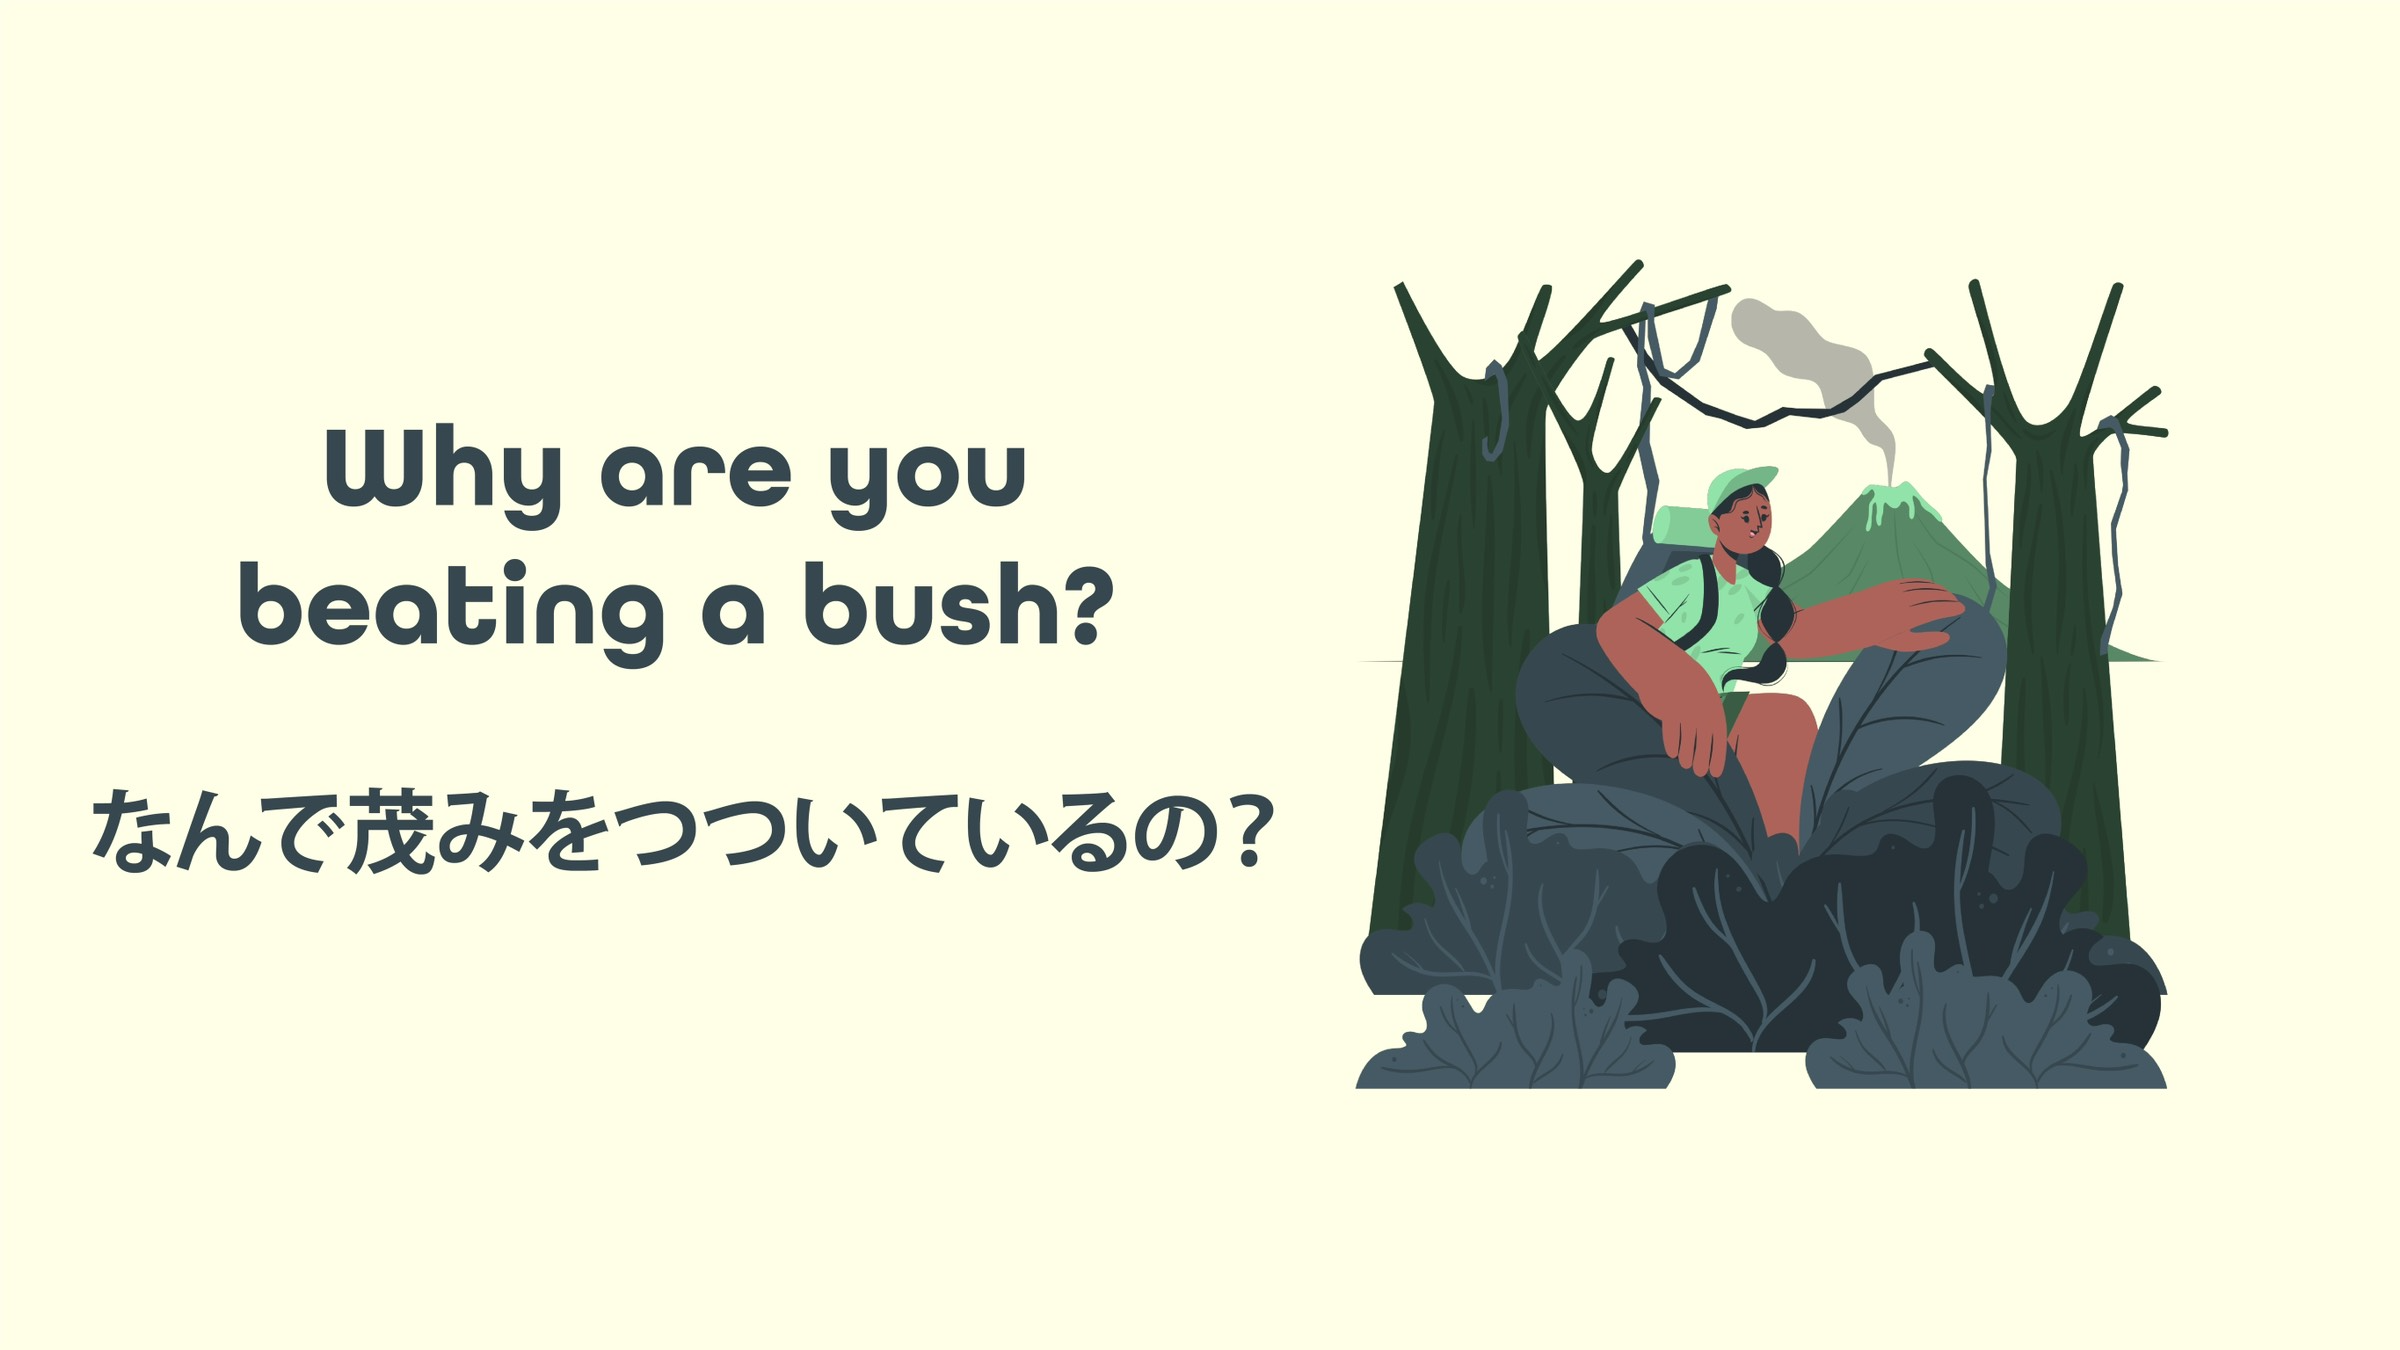 Featured image for “Why are you beating a bush? なんで茂みをつついているの？”